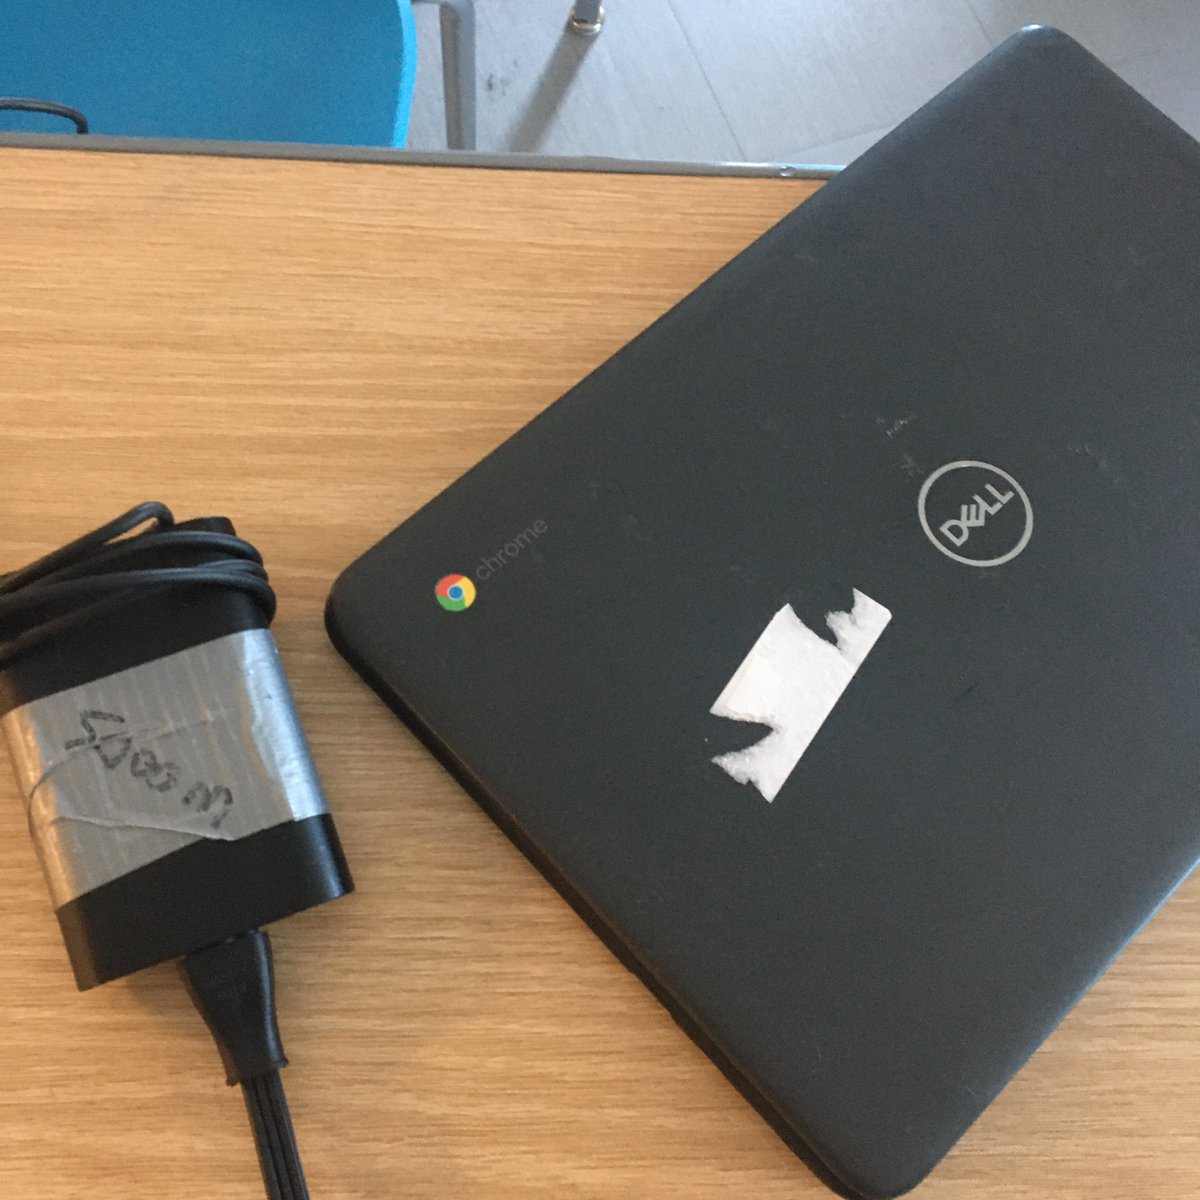 Thinking ahead to Chromebook & charger distribution next year… Does anyone put student names on with removable labels? Our district just uses a serial number/barcode on them til they fall off #EdTech